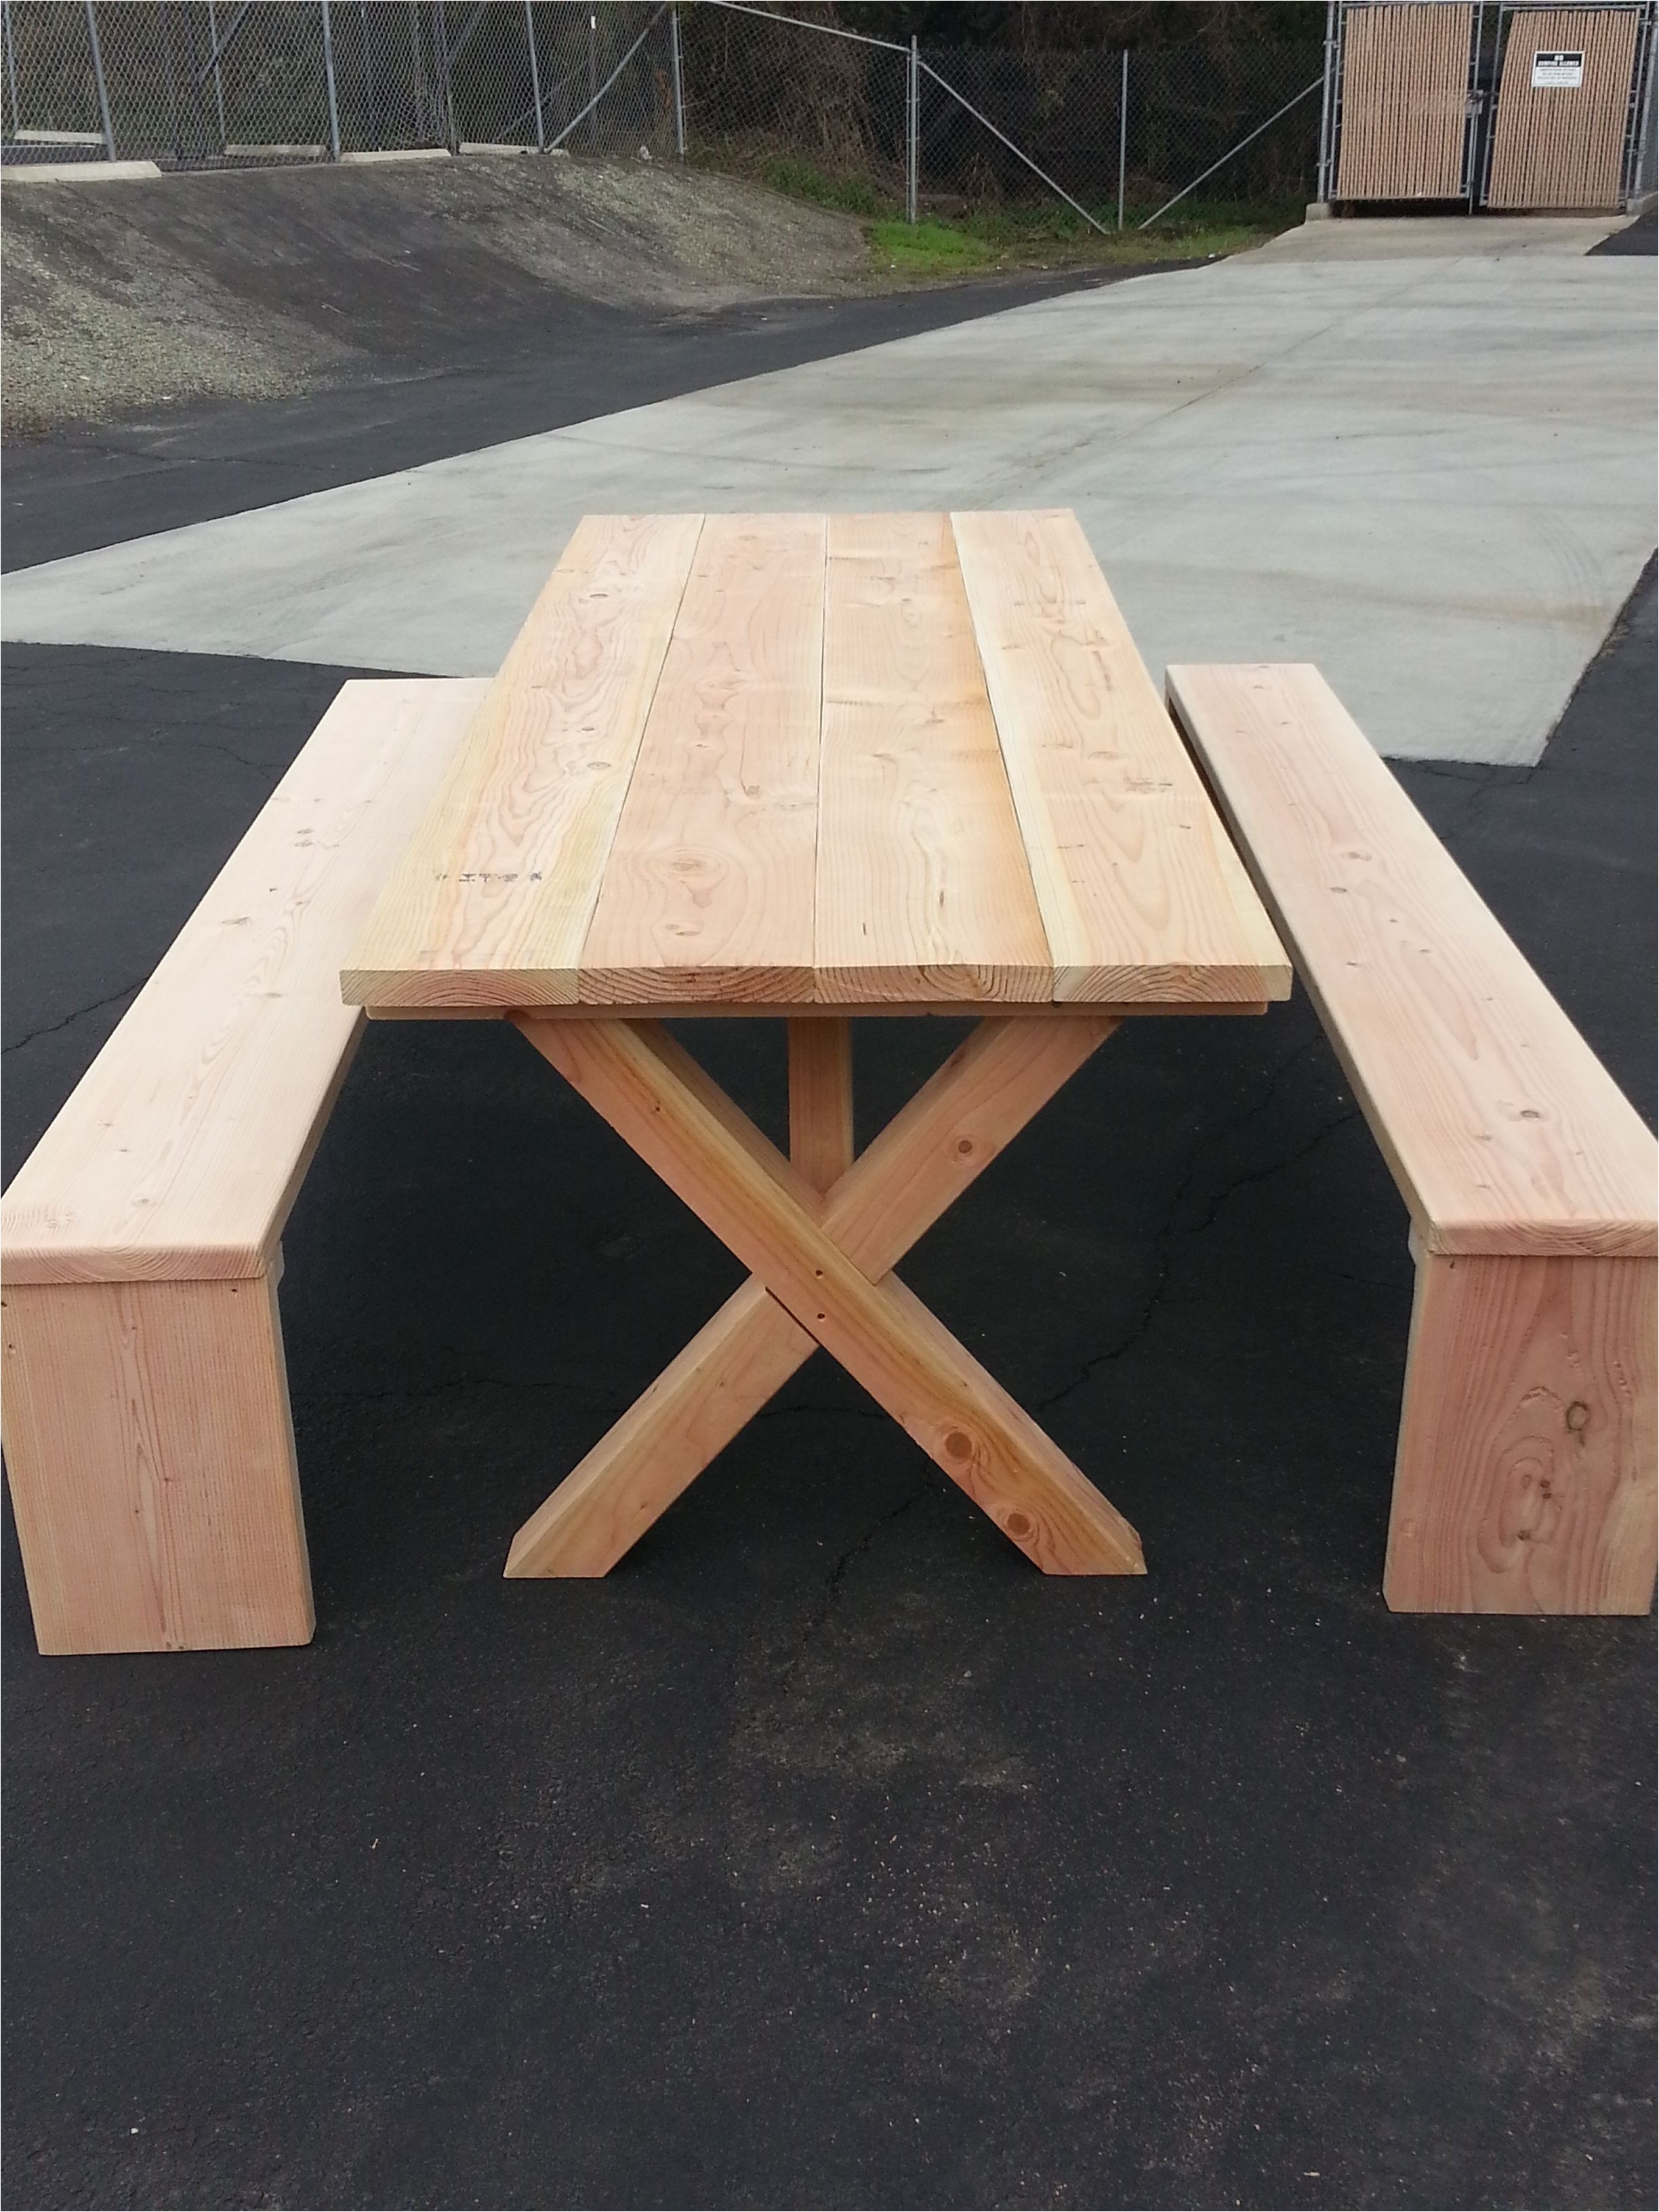 0d patio chairs dad261c92f bfe44f17 unfinished 8 ft over sized doug fir picnic table w x